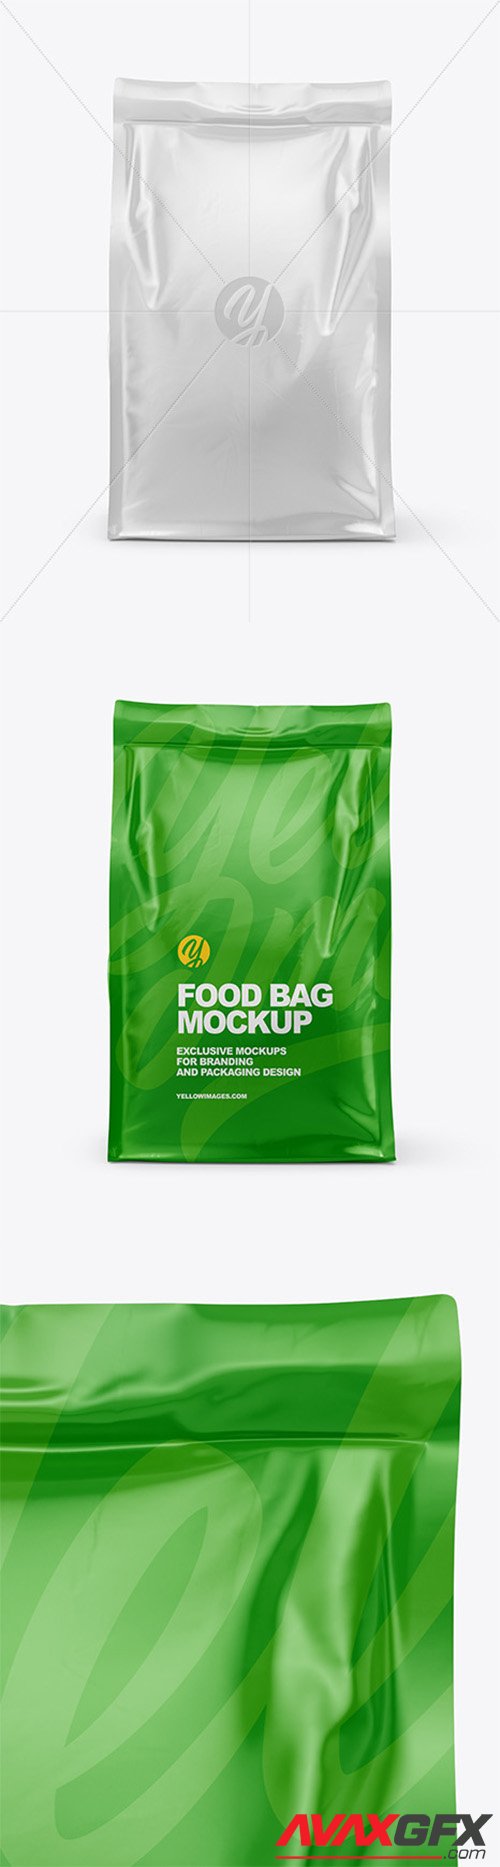 Download Glossy Food Bag Mockup Front View 64649 Avaxgfx All Downloads That You Need In One Place Graphic From Nitroflare Rapidgator Yellowimages Mockups